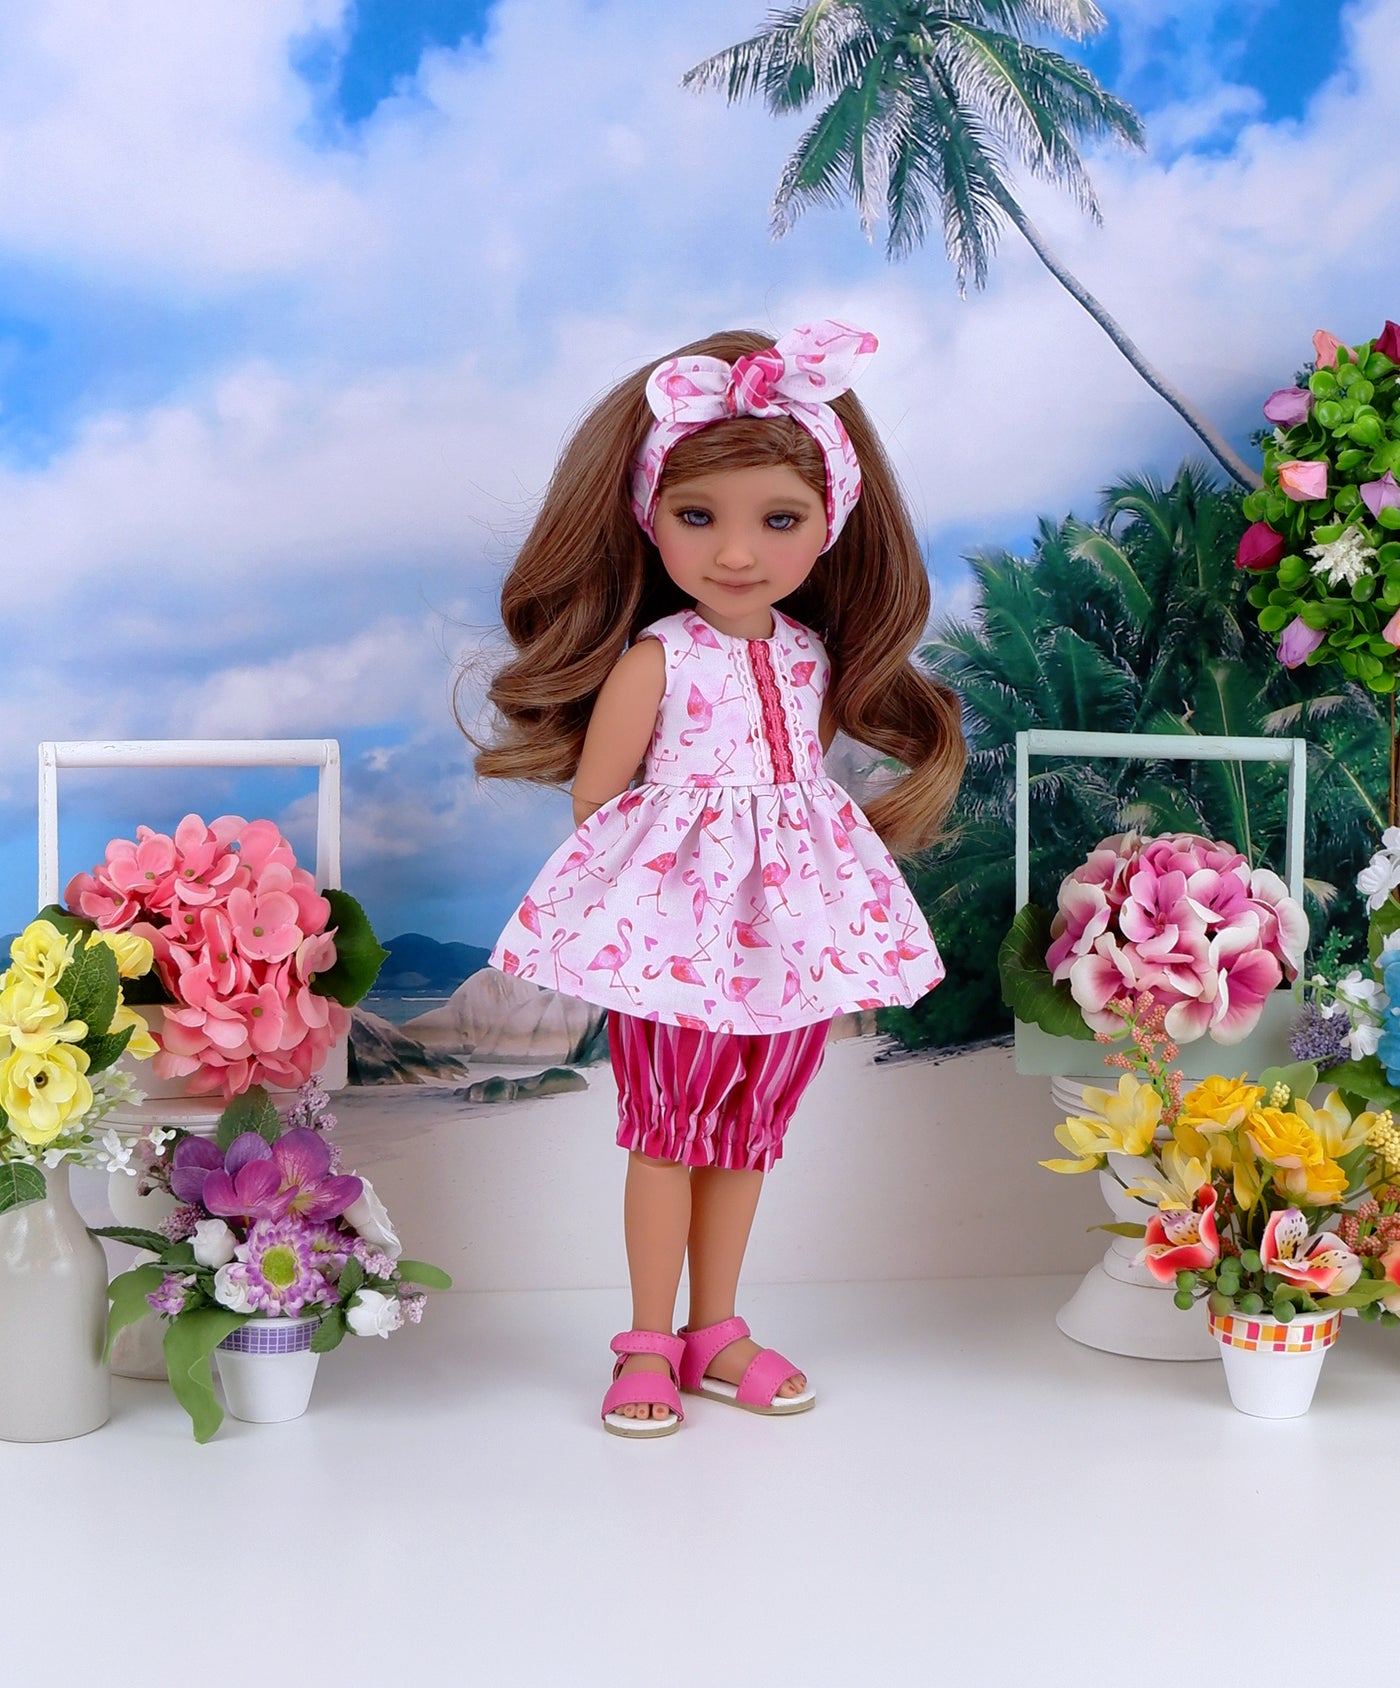 Flamingo Heart - top & bloomers with sandals for Ruby Red Fashion Friends doll